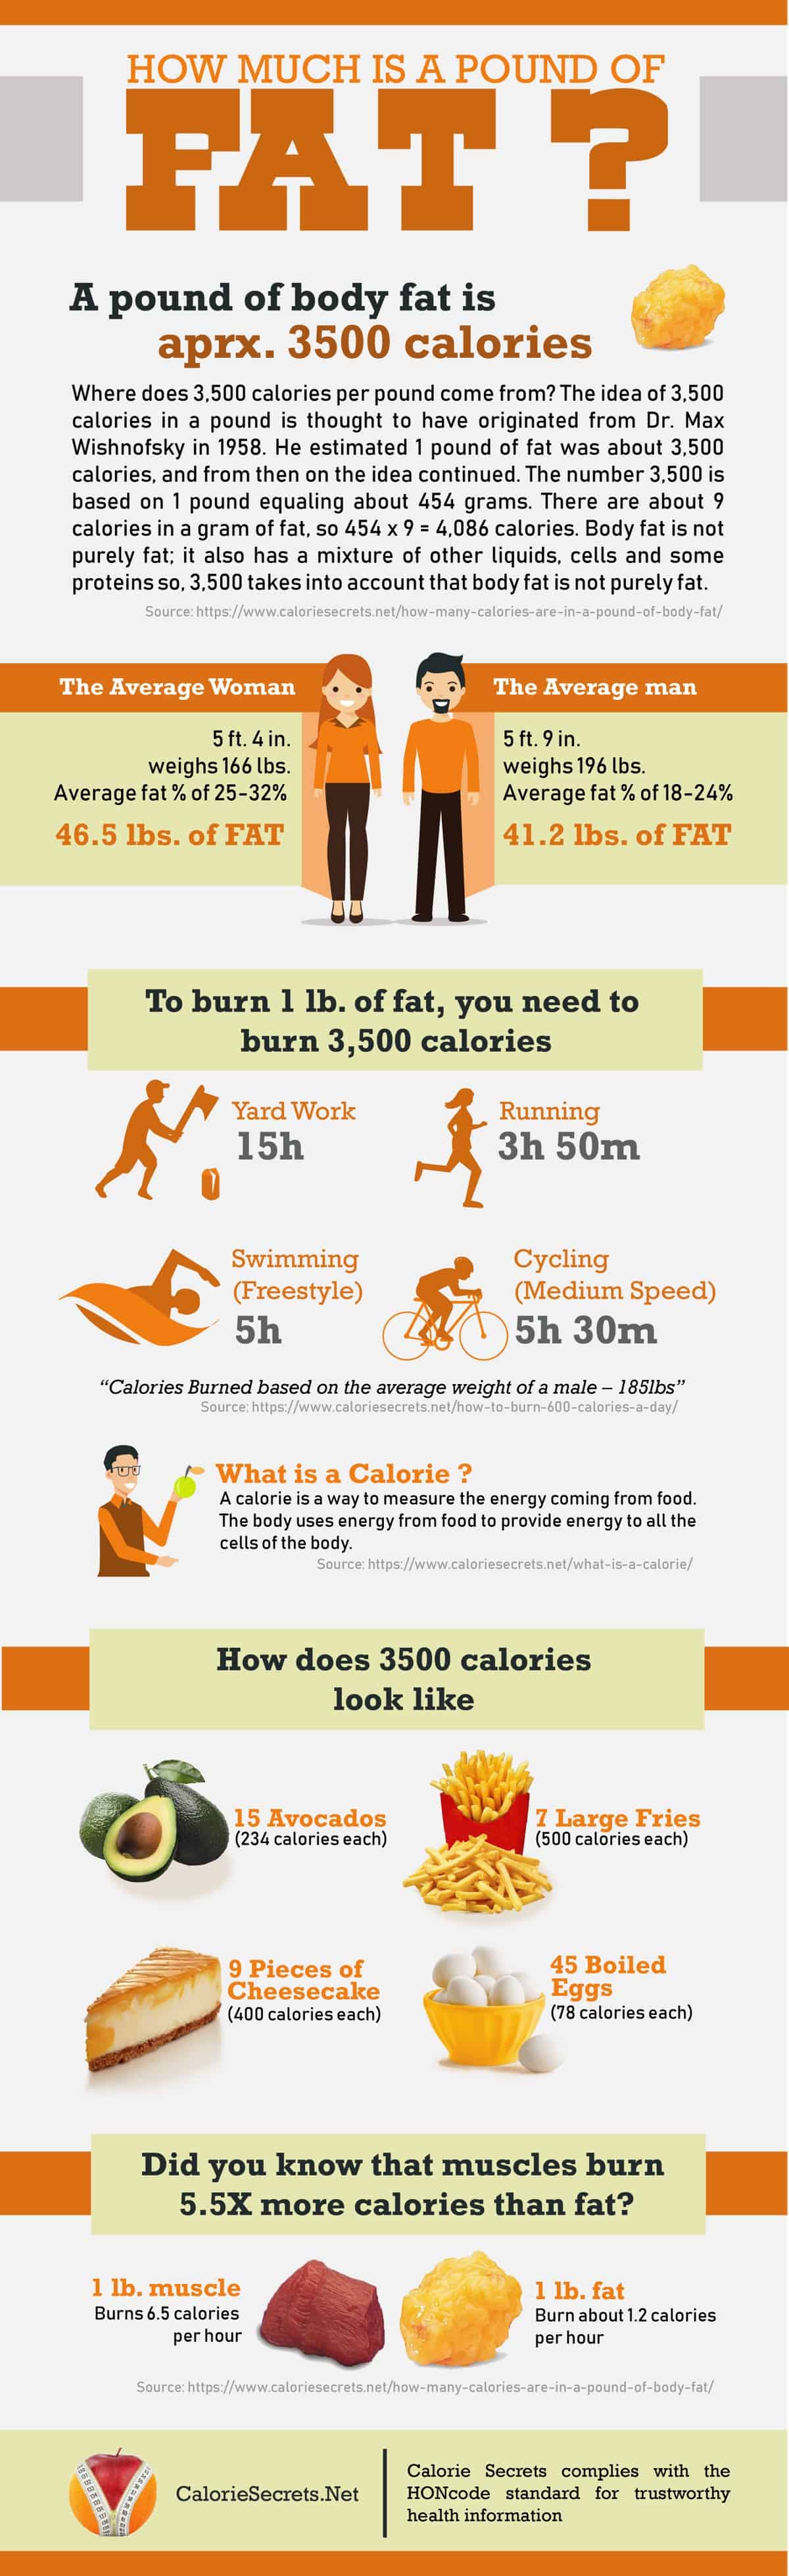 How Many Calories Convert To Pounds